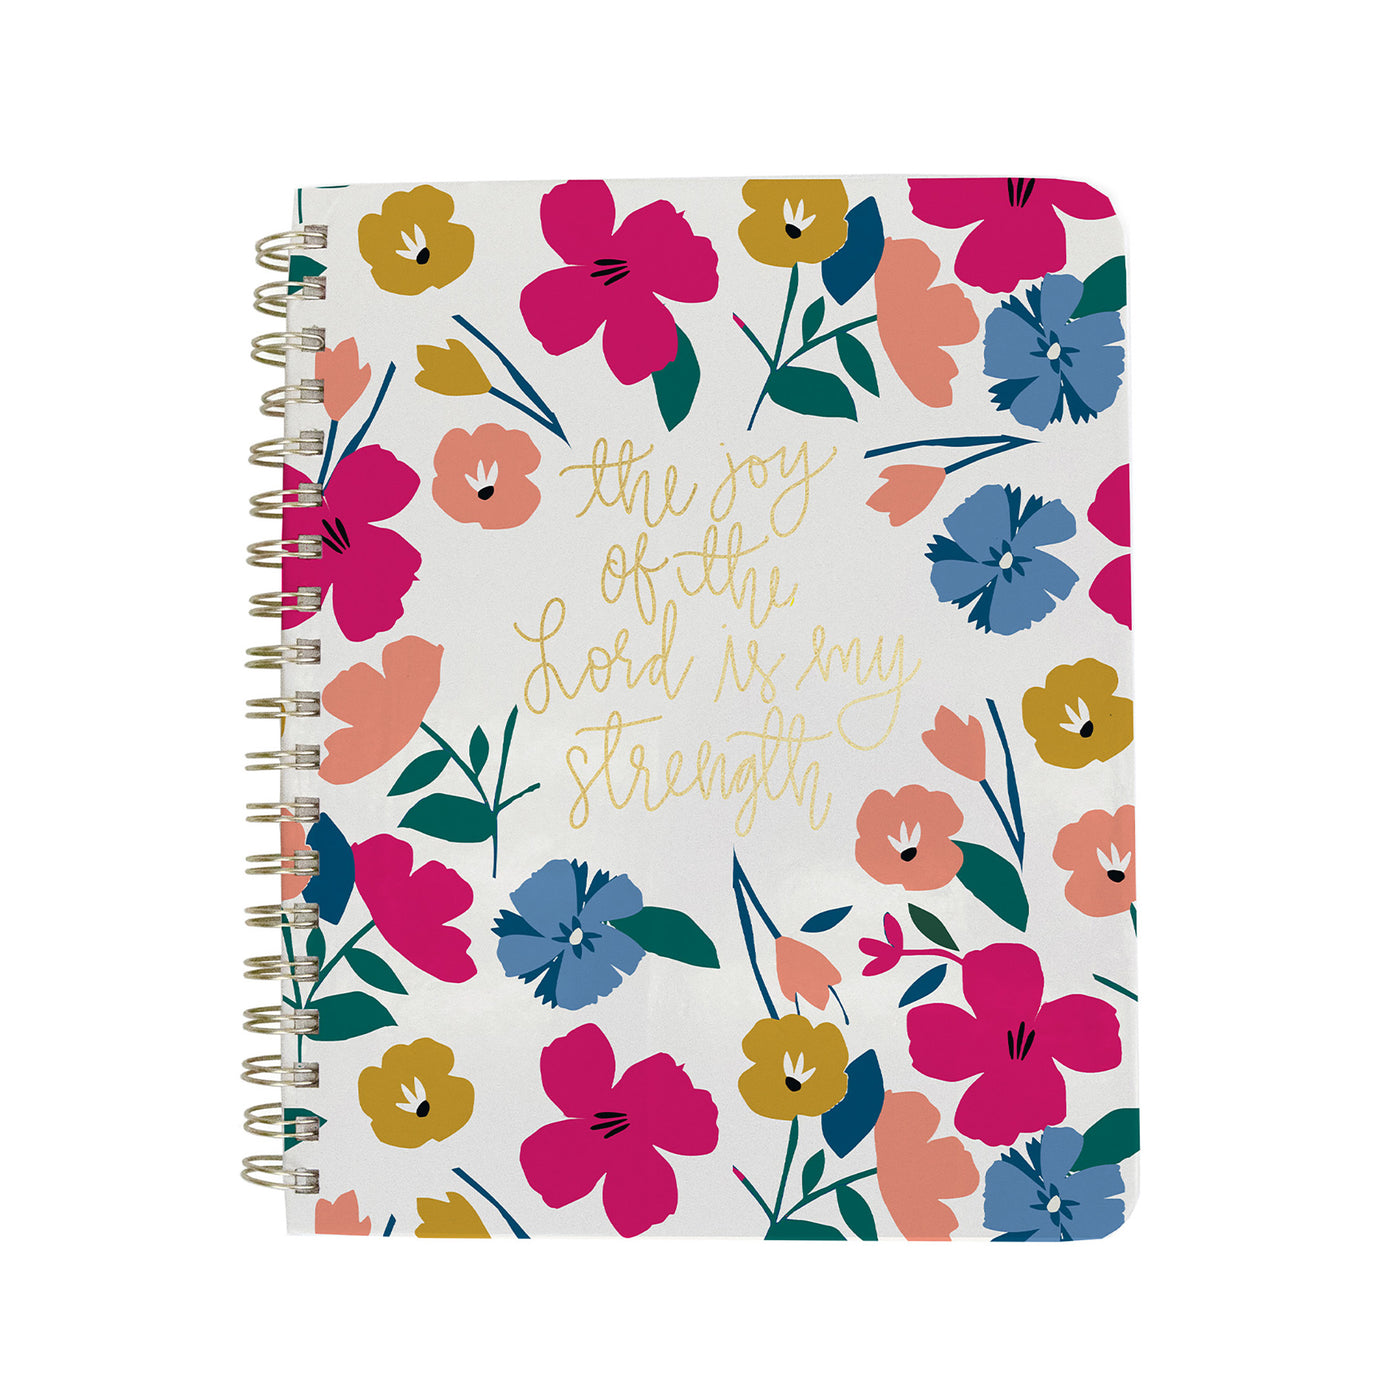 The Joy of the Lord | Spiral Notebook - Mary Square, LLC